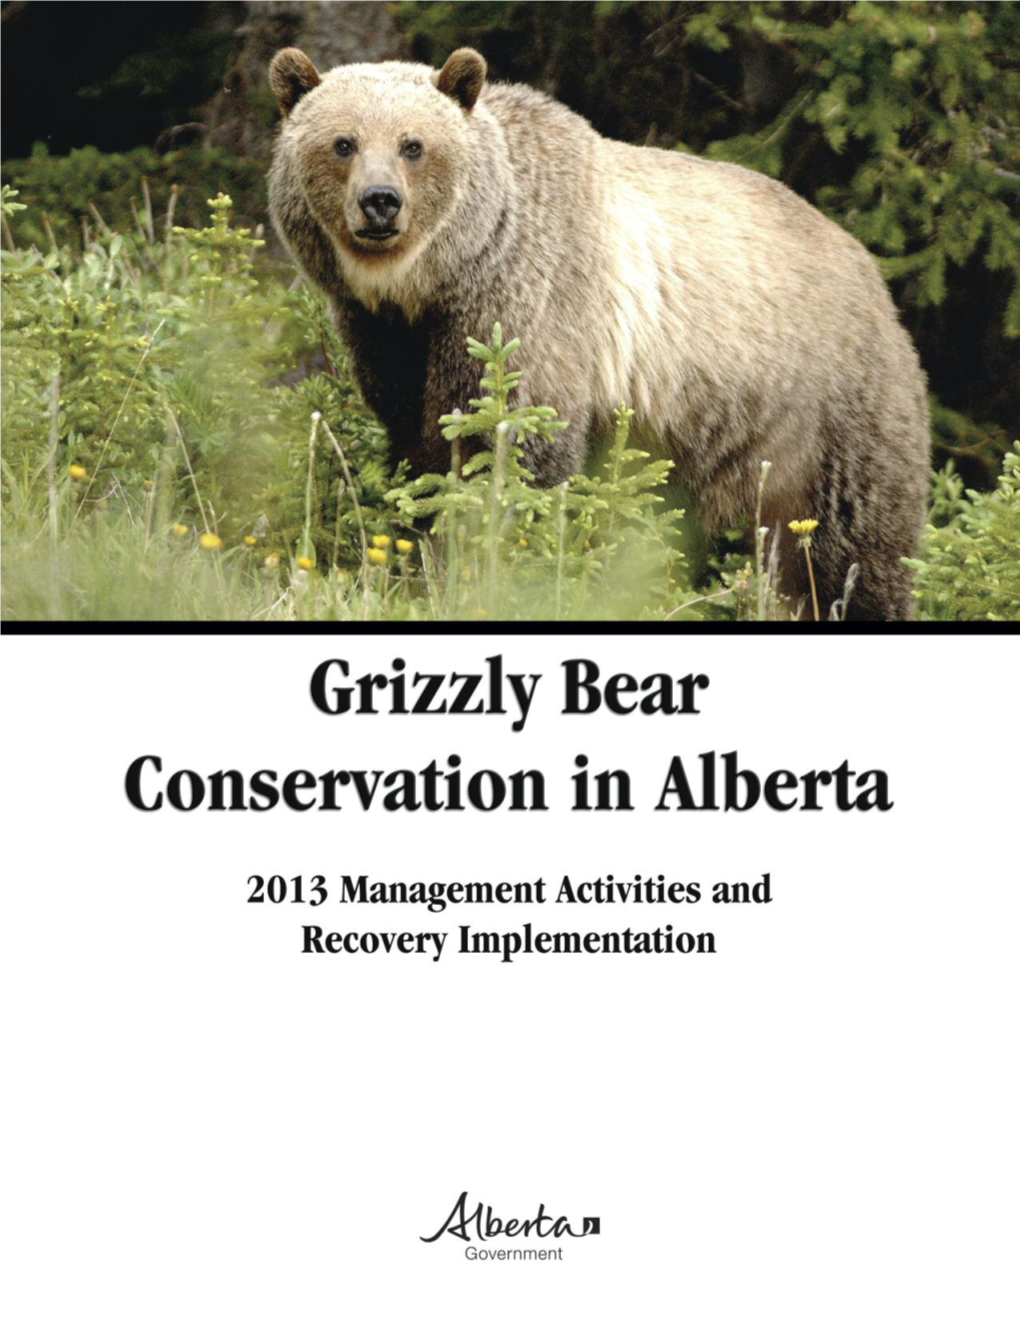 Grizzly Bear Conservation in Alberta: 2013 Management Activities and Recovery Implementation